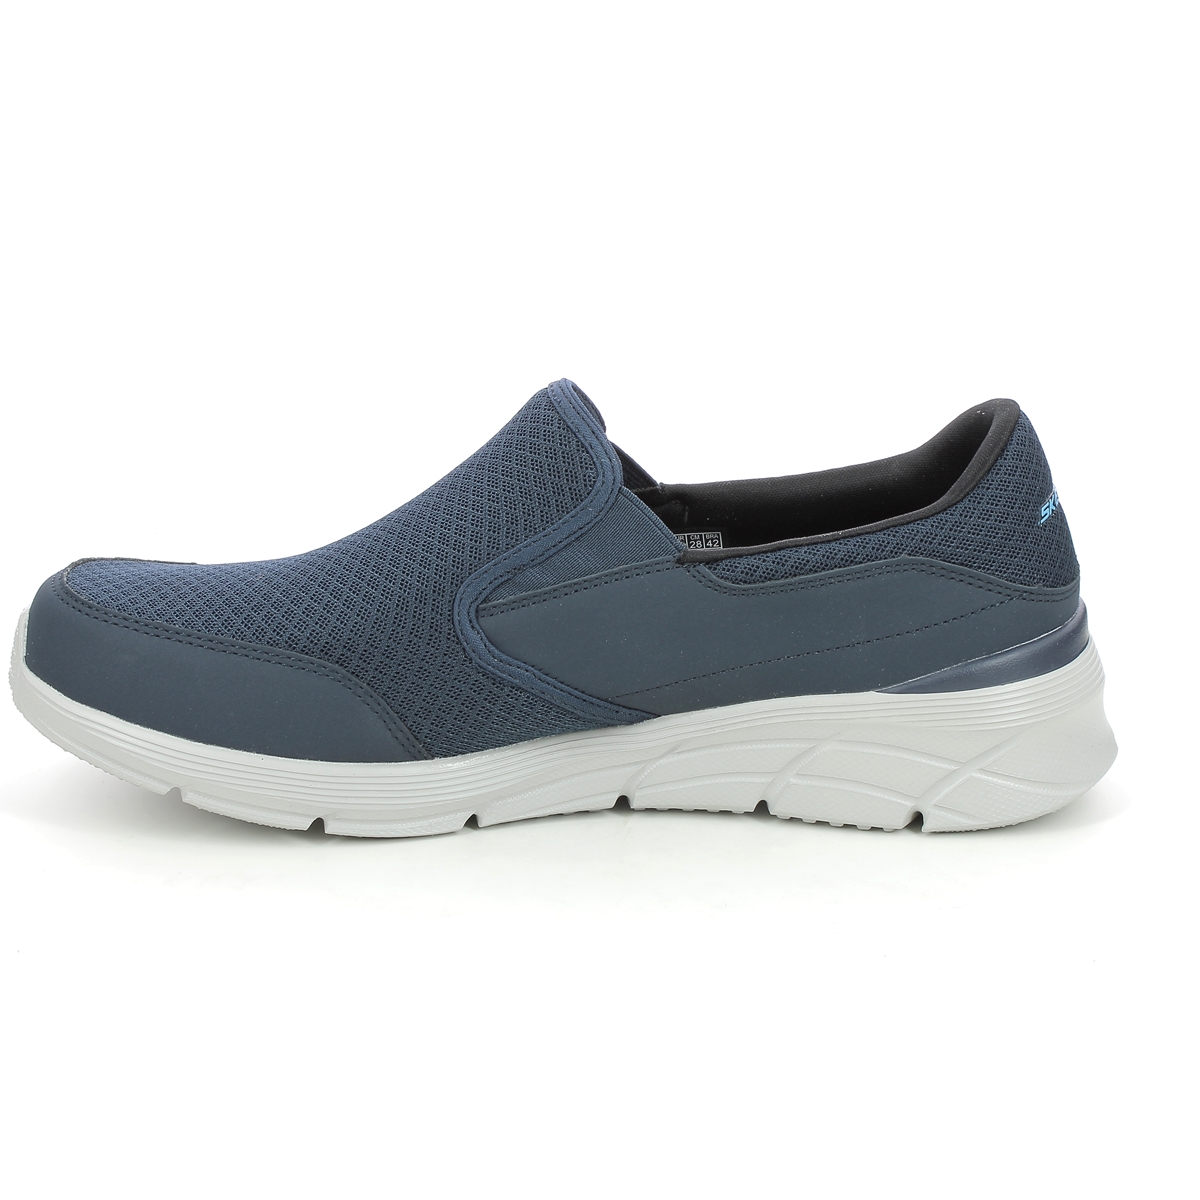 Skechers Persisting Relaxed Fit NVY Navy Mens trainers 232017